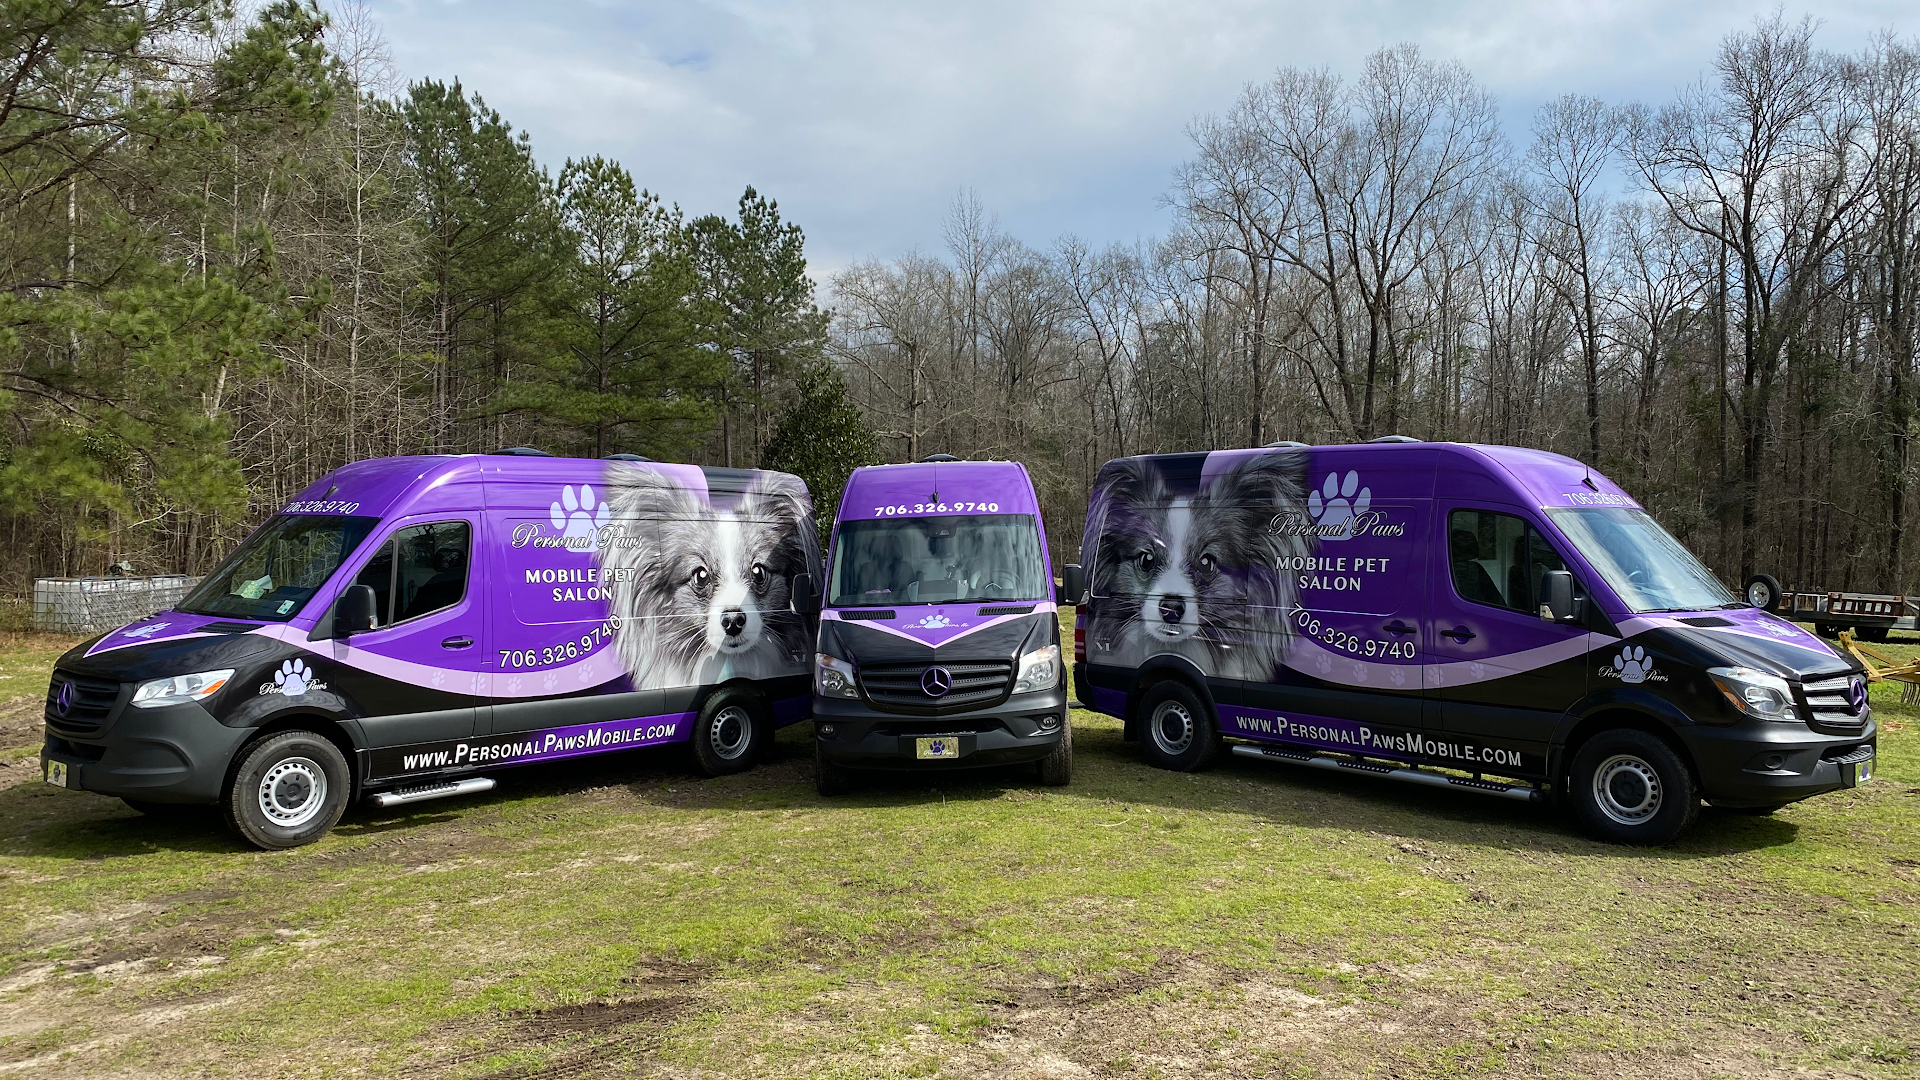 Personal Paws Mobile Pet Grooming Salon